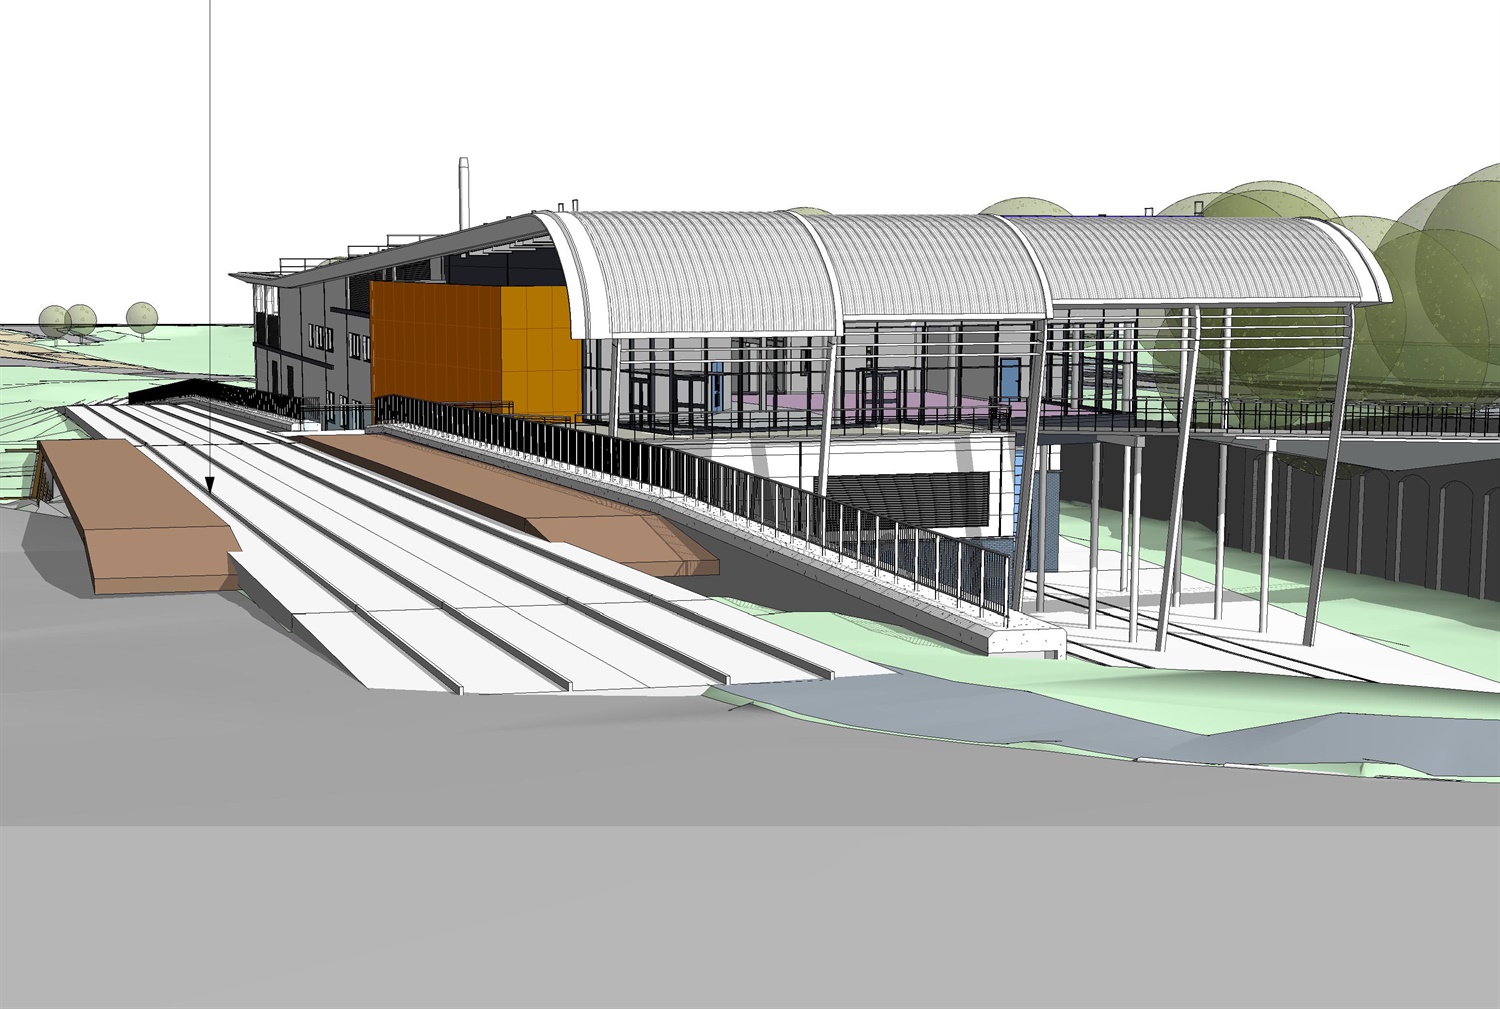 Dudley council looking to develop £25m ‘very light rail’ innovation hub